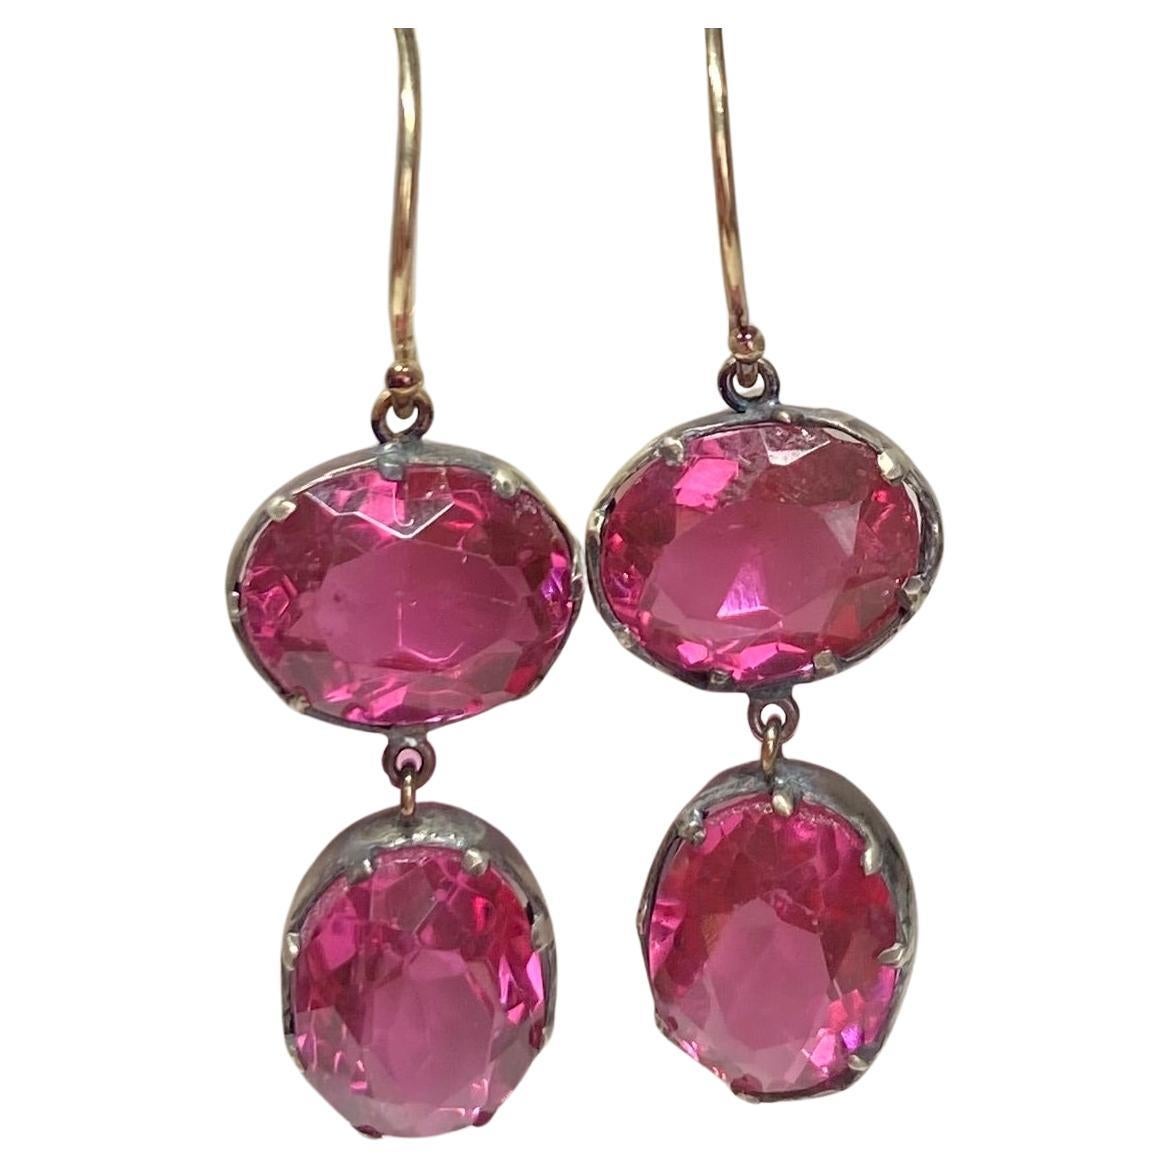 Antique Victorian Double Pink Paste Earrings